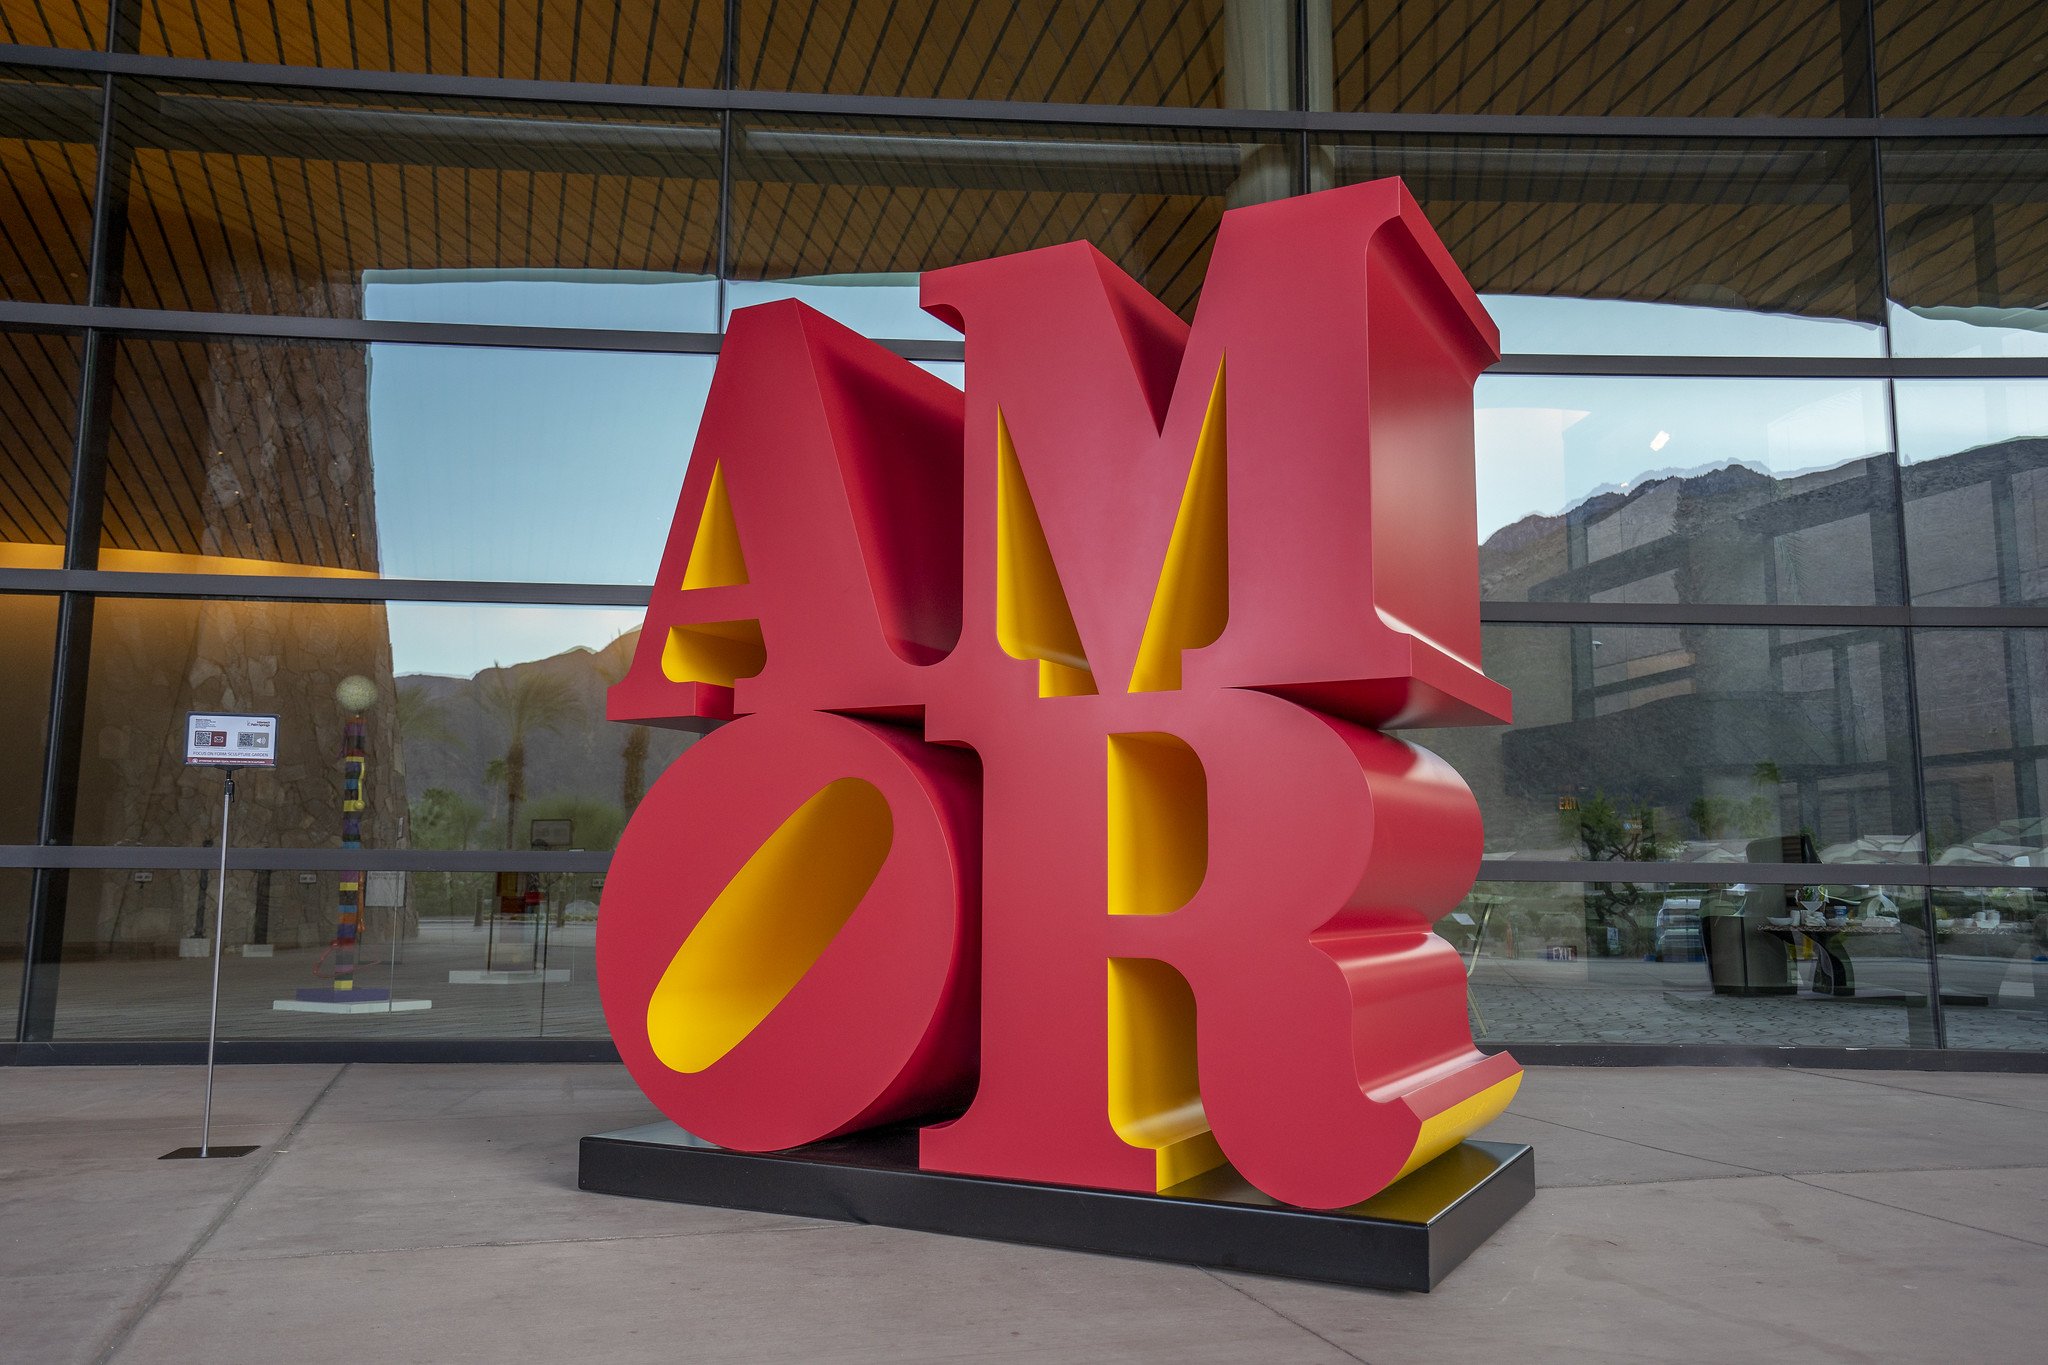  AMOR (Red Yellow) by Robert Indiana. Presented by Galerie Gmurzynska at Intersect Palm Springs 2022 Focus on Form: Sculpture Garden 